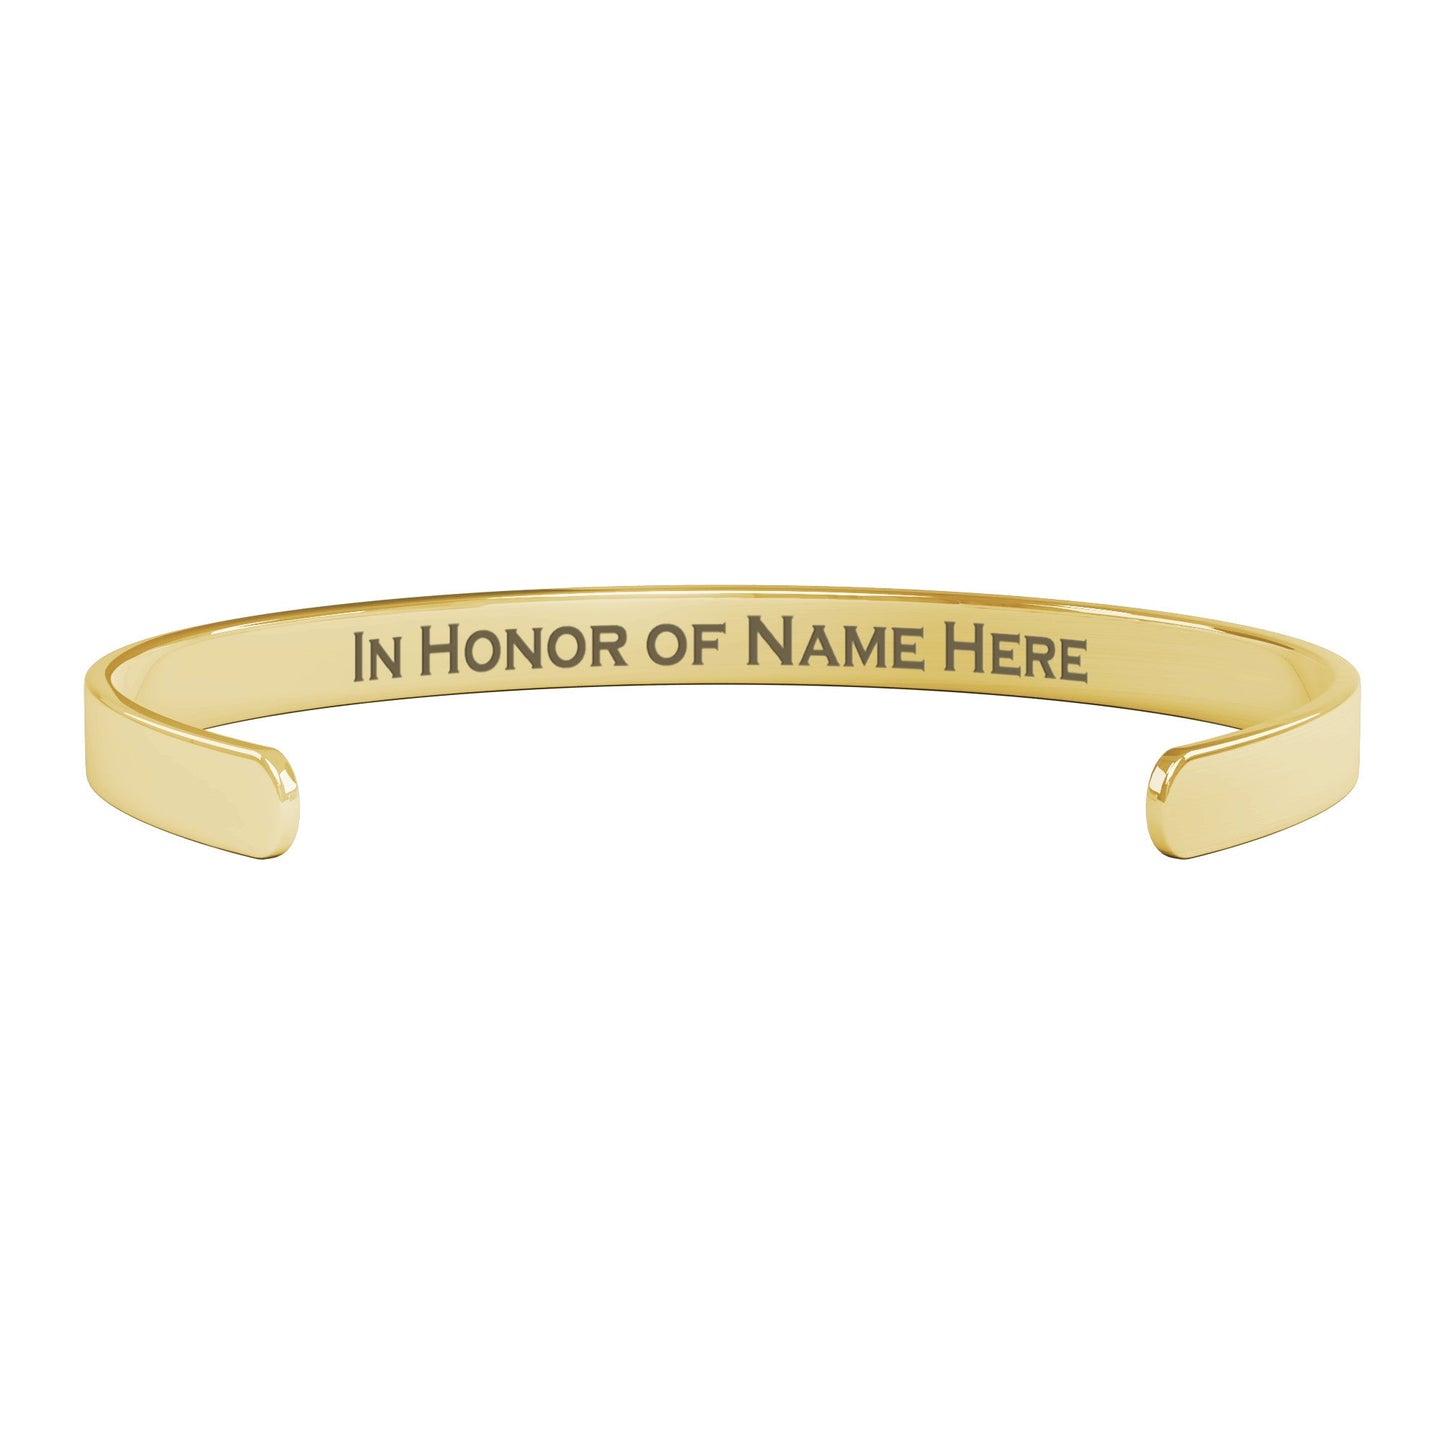 Personalized Lung Cancer Awareness Cuff Bracelet |x|